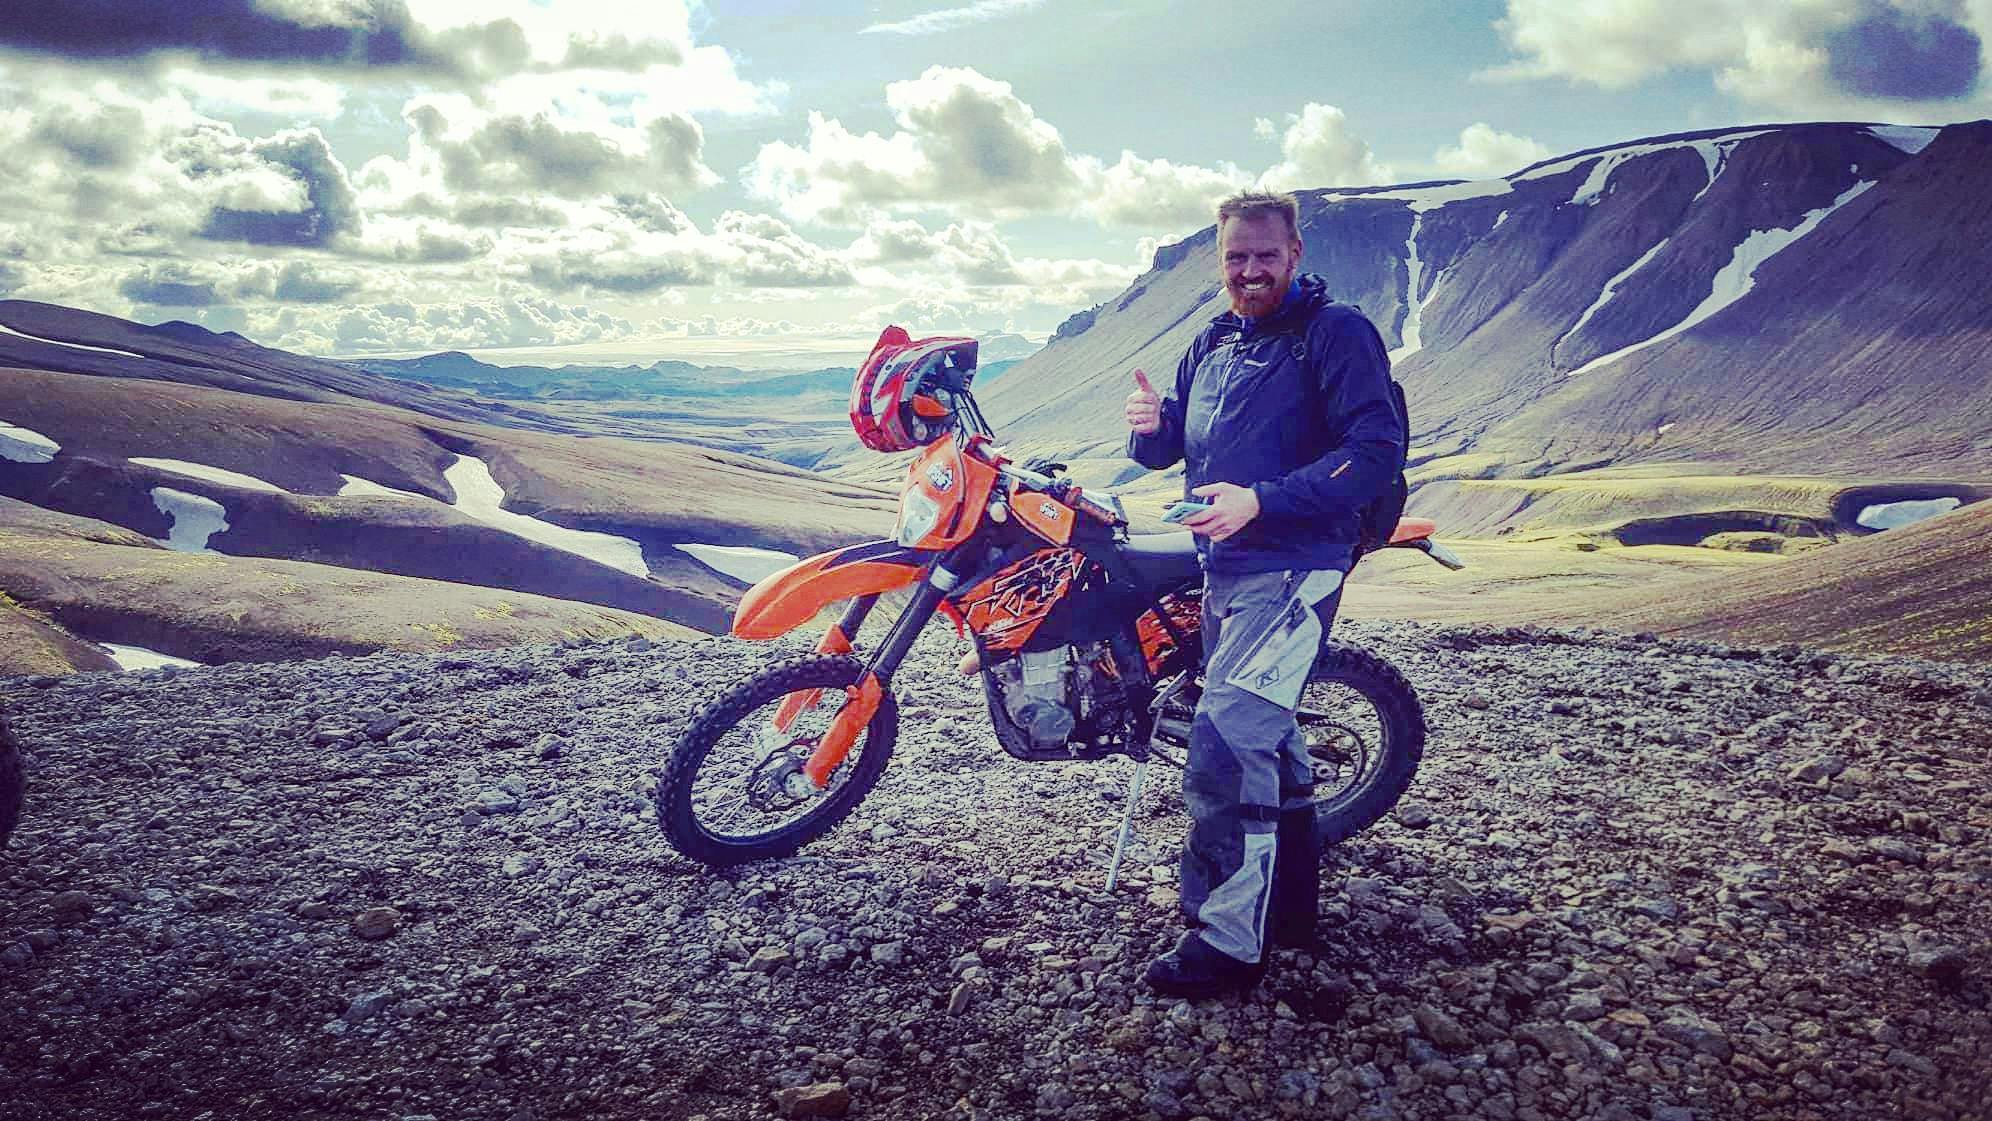 Wide valleys seen fron high above are a great reason to join a dirt bike tour in the Icelandic highlands